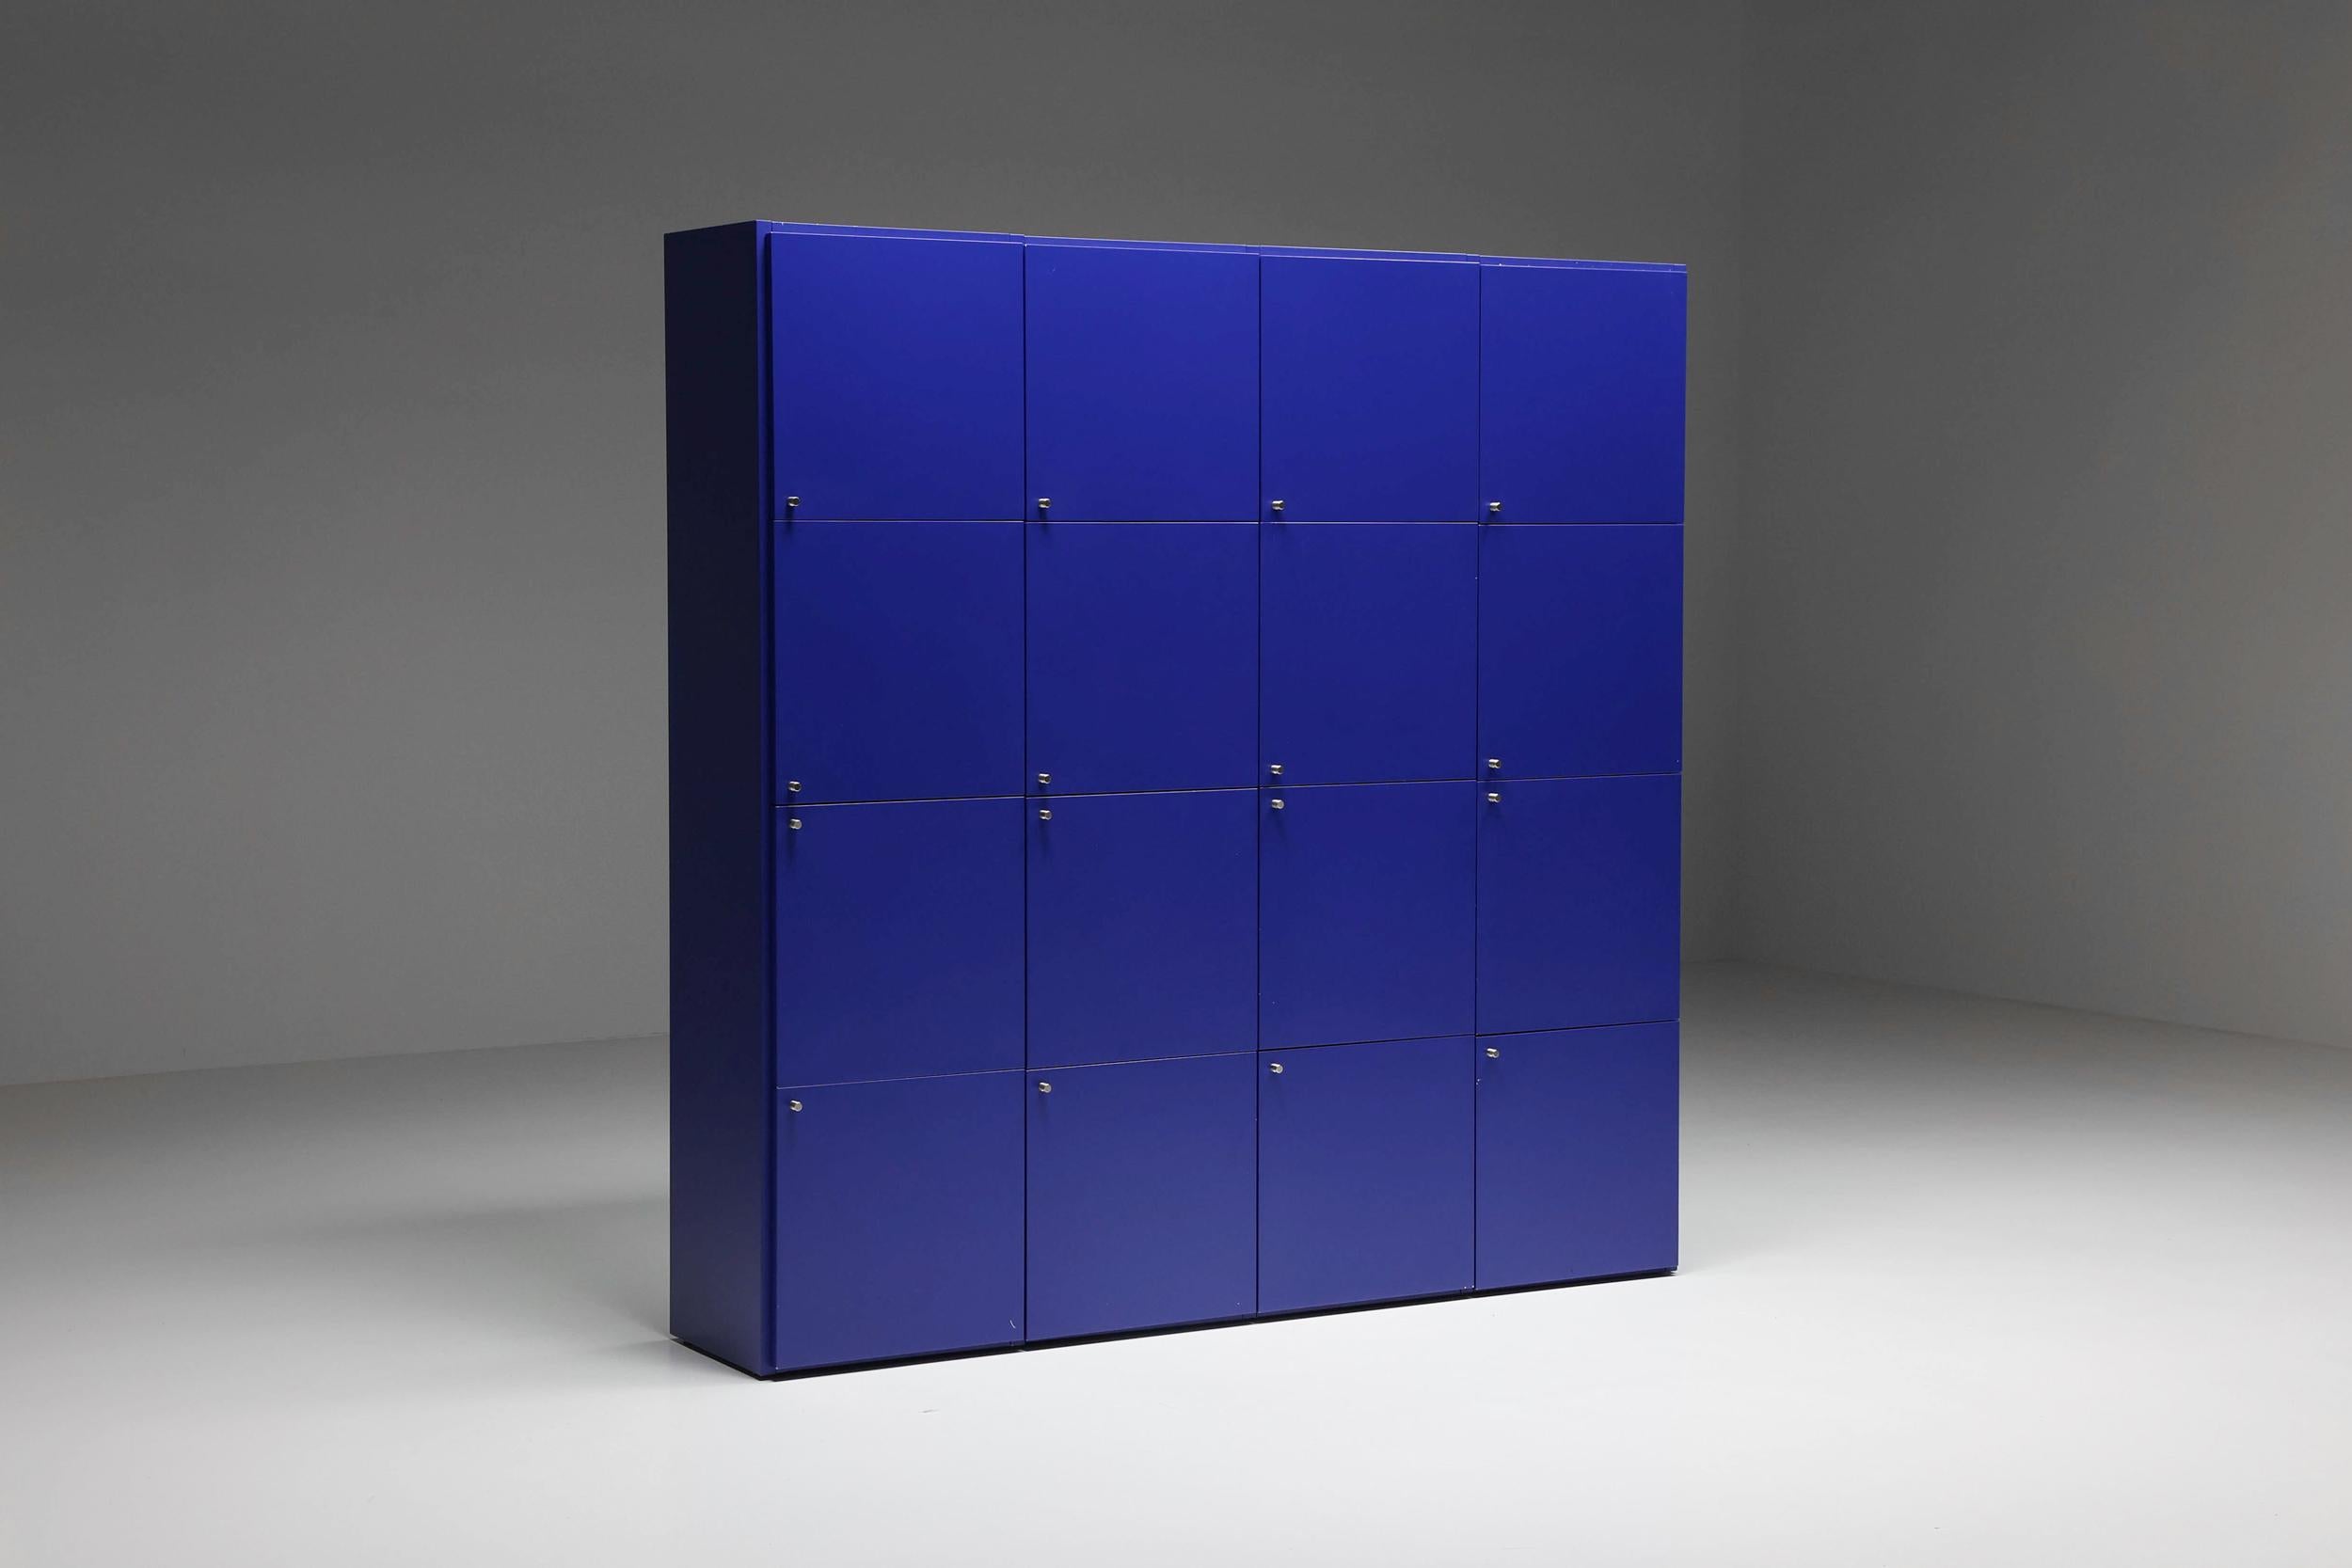 Edra Cabinet; Postmodern; Edra; Paesaggi Italiani; Bookcase; 1960's; 

Postmodern Edra Paesaggi Italiani bookcase made in the 1960s. This sixteen cube storage element includes doors made in blue-colored laminate. Perfect for storing items and